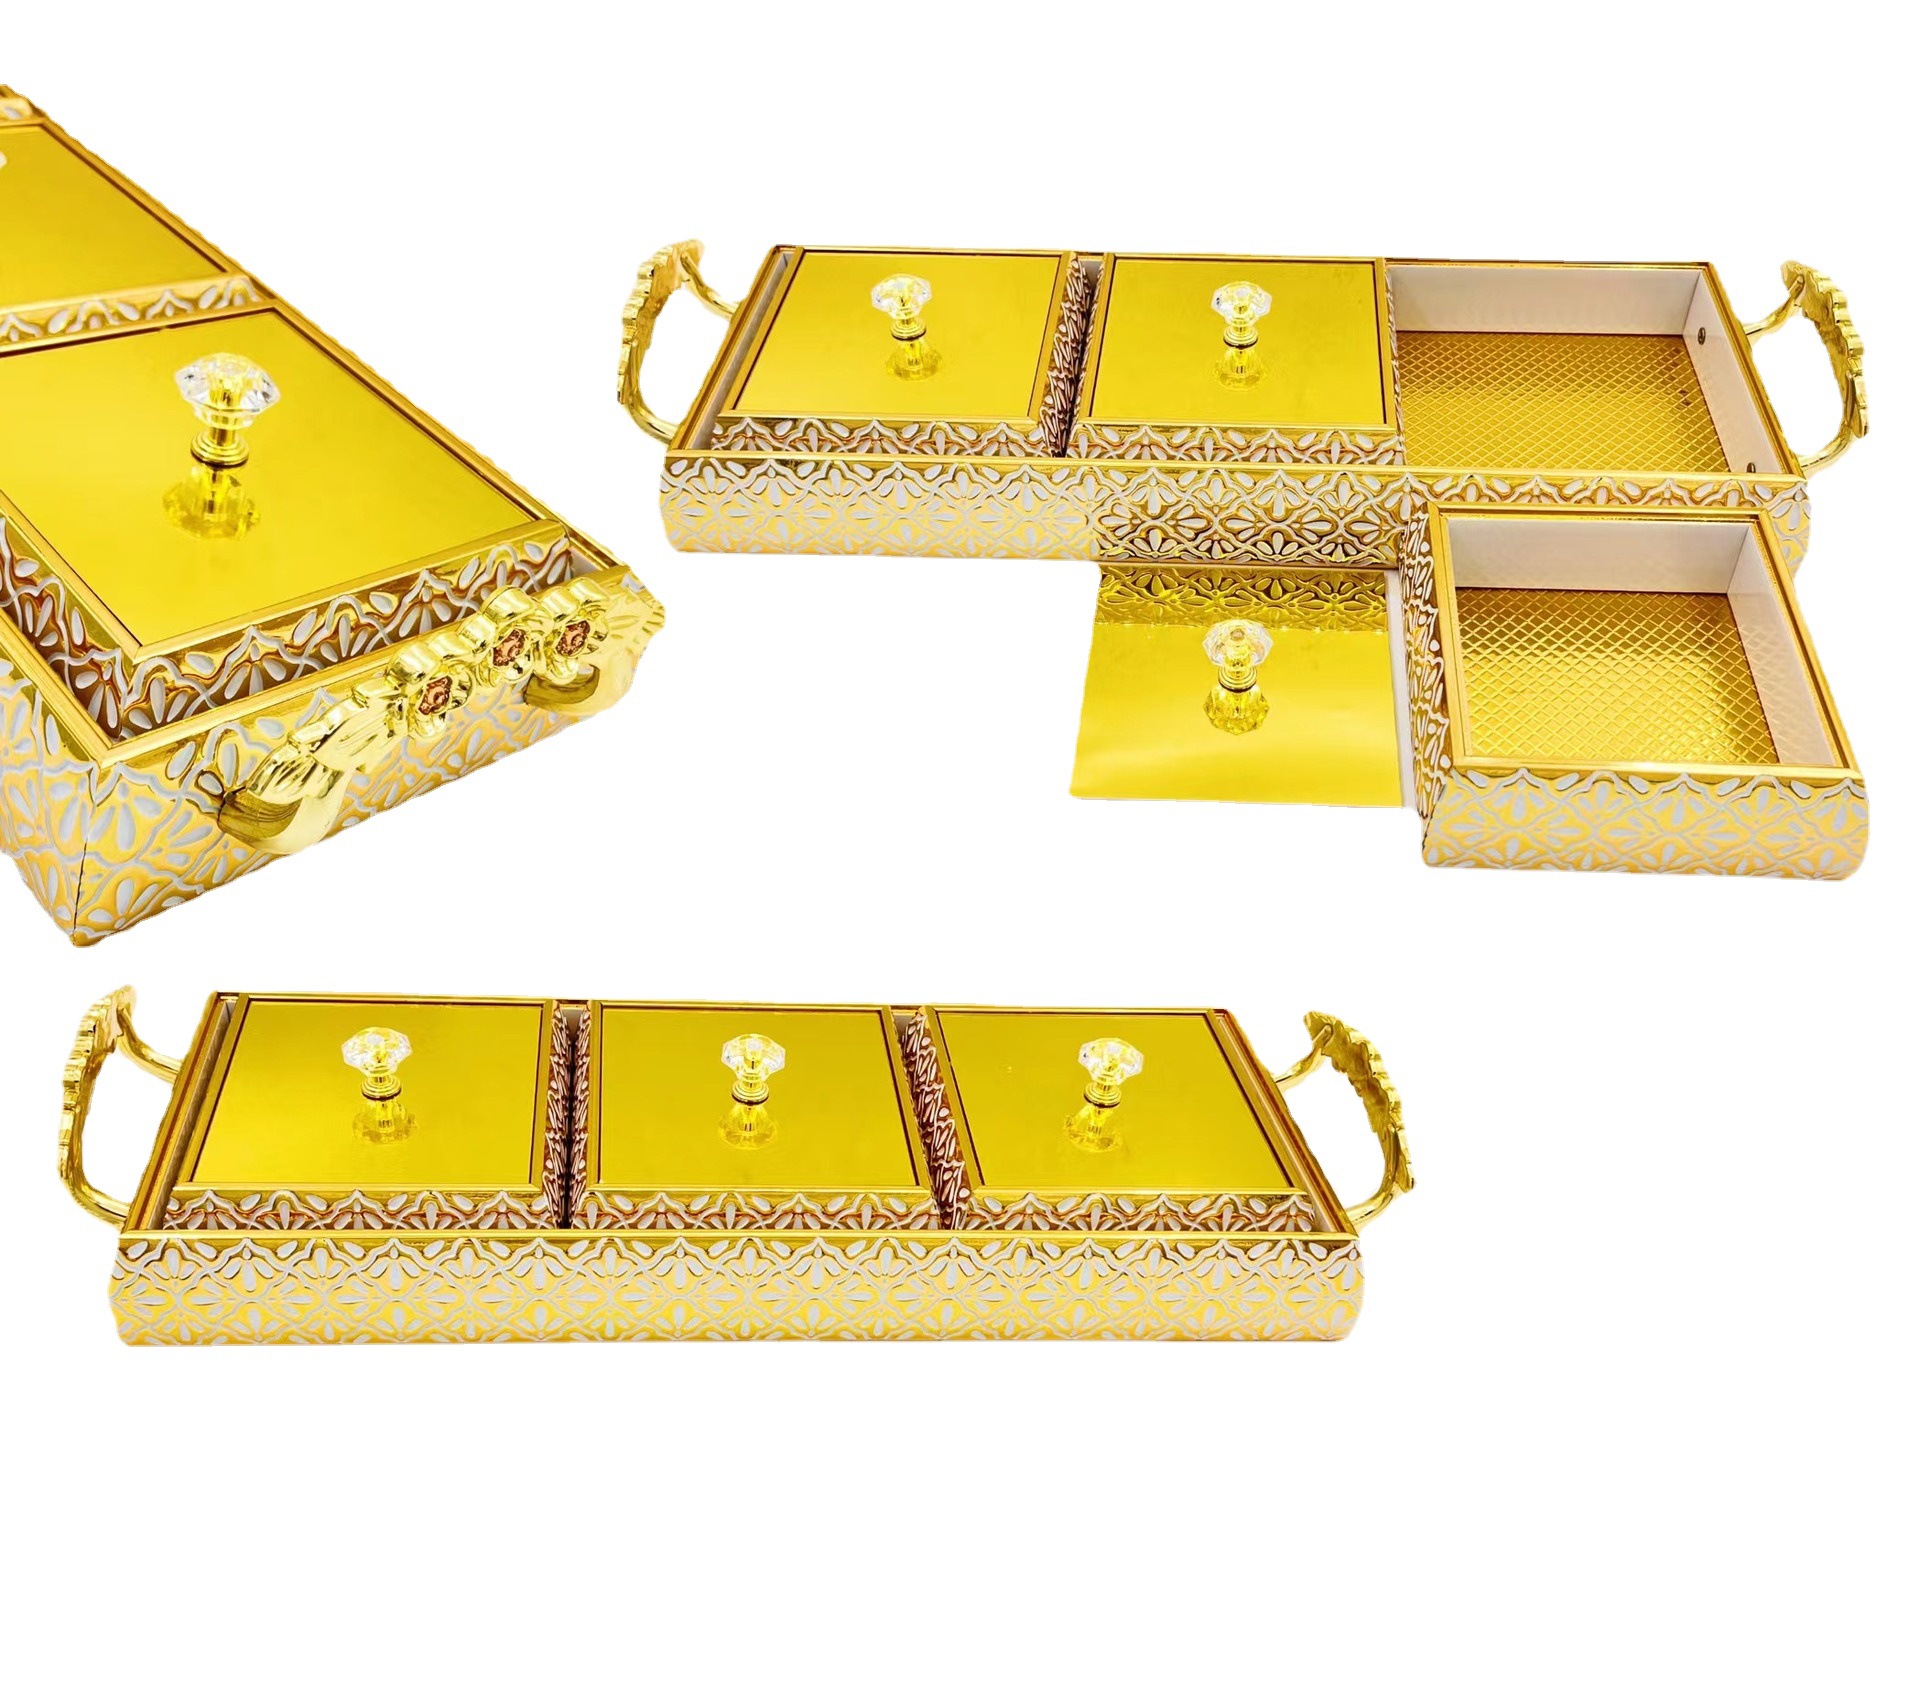 Middle East Islamic Set Three Candy Box Fruit Plate Wedding Tuck Box Tissue Box with Handle